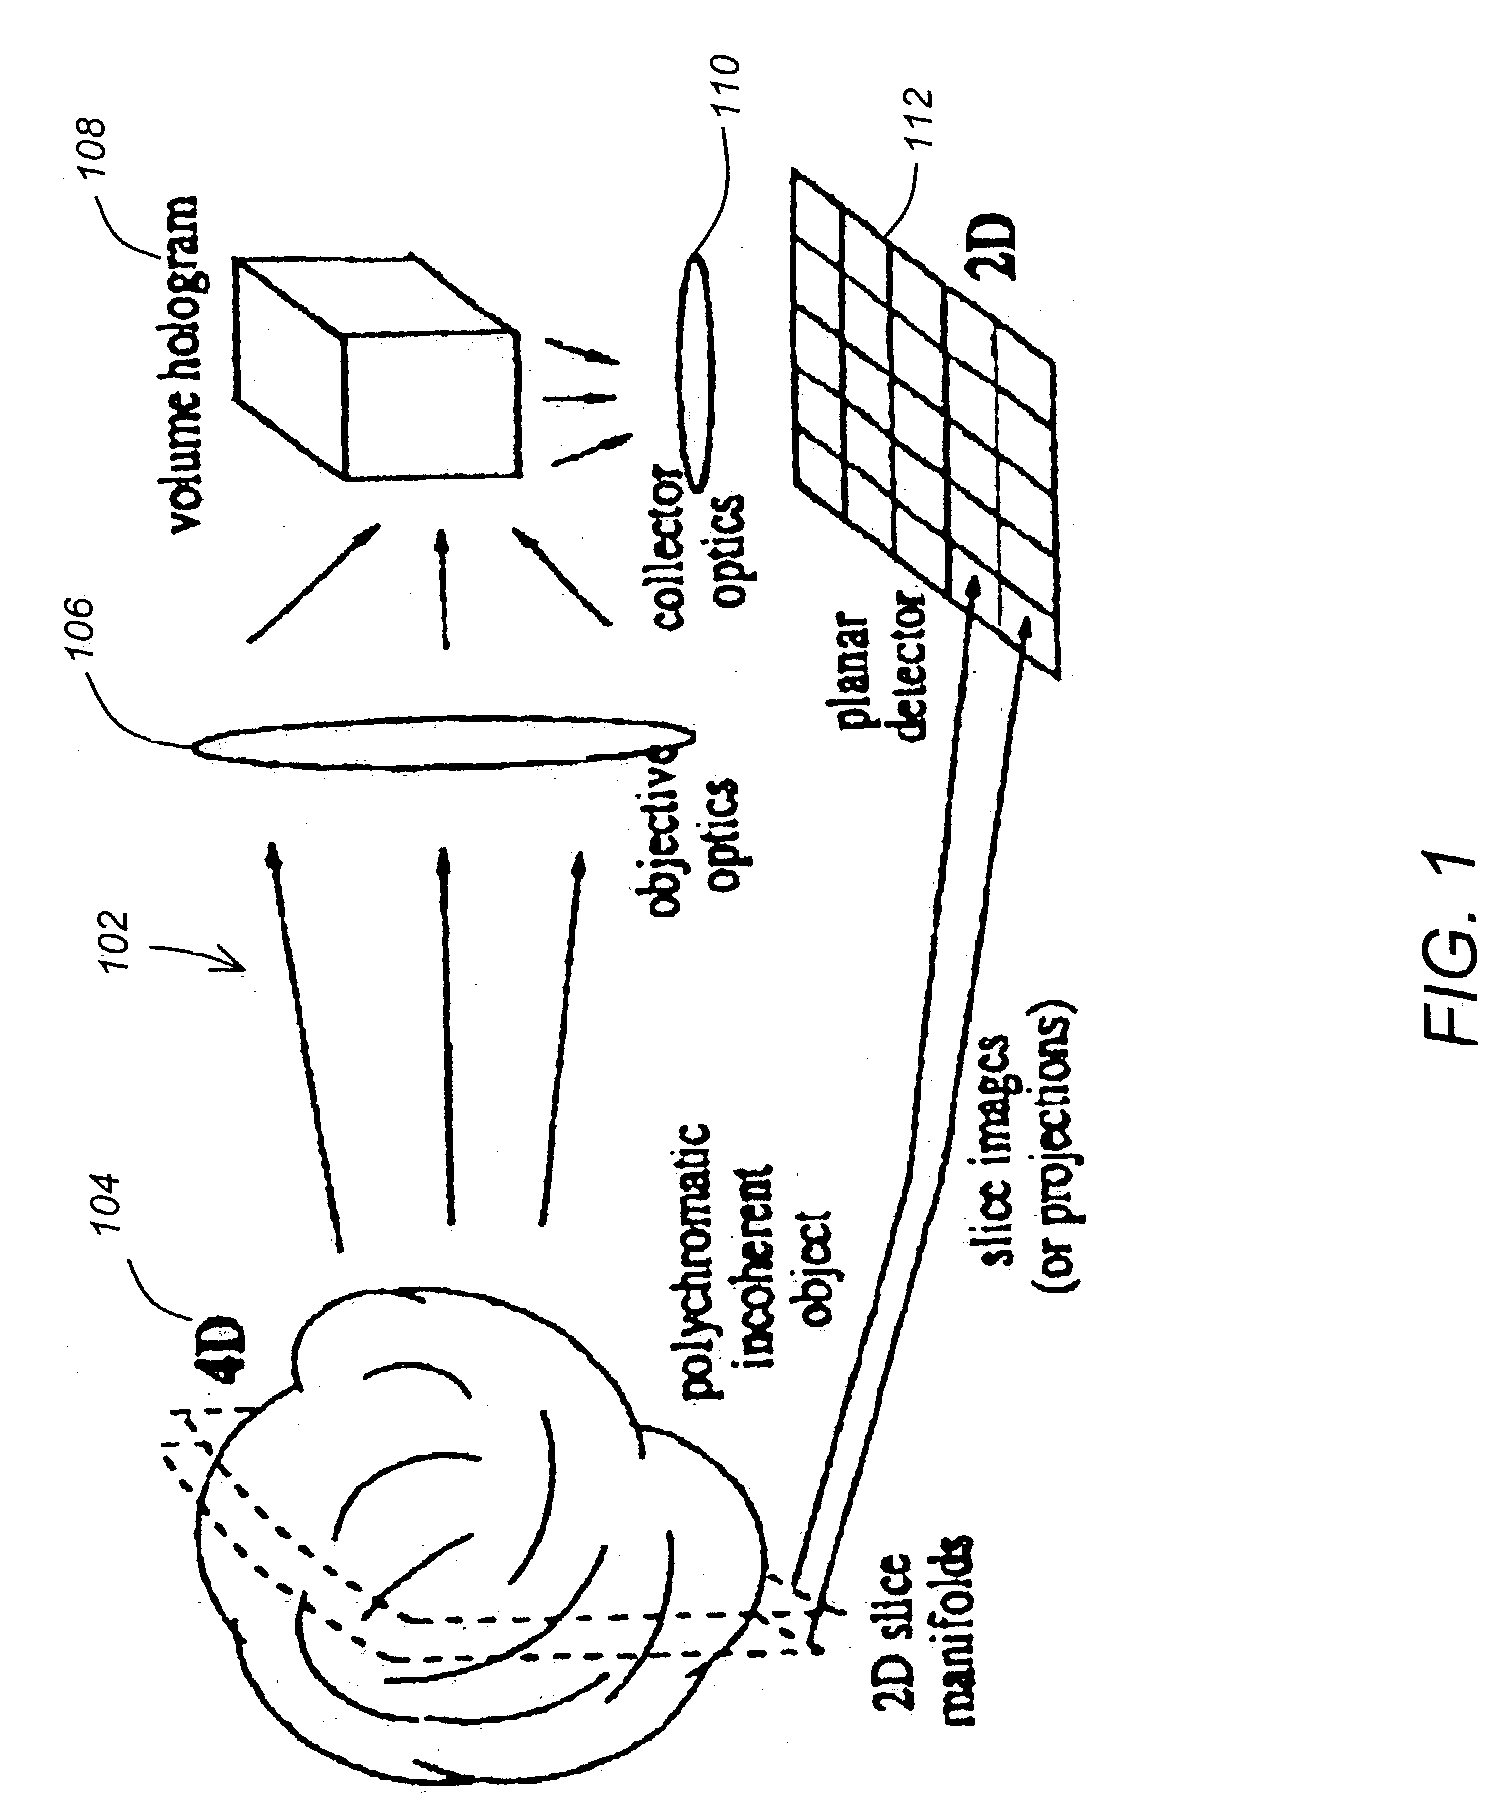 Holographic imaging spectrometer